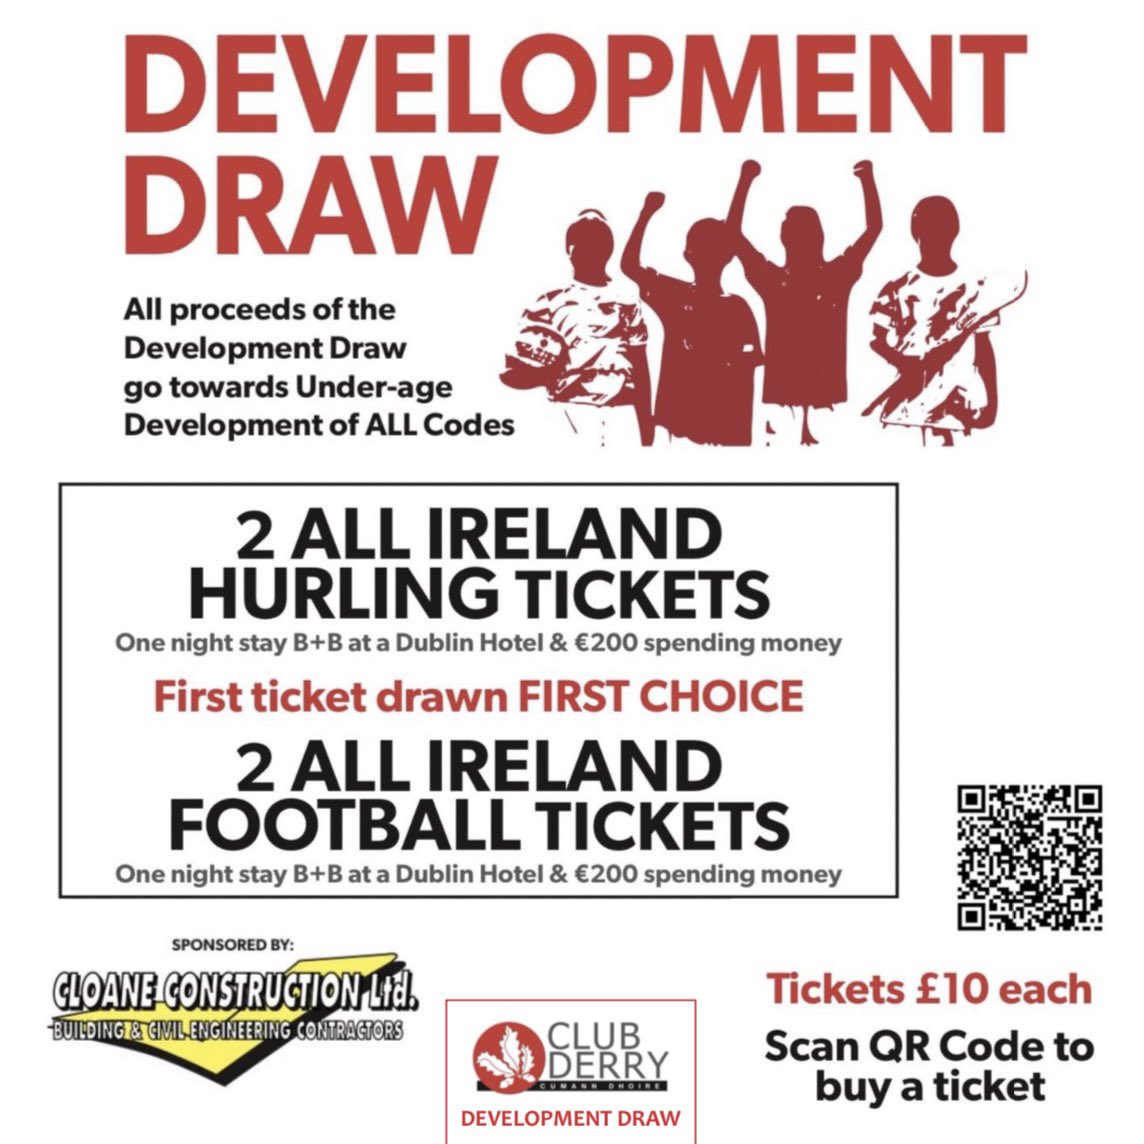 🎟️🇦🇹 𝗖𝗟𝗨𝗕 𝗗𝗘𝗥𝗥𝗬 𝗗𝗘𝗩𝗘𝗟𝗢𝗣𝗠𝗘𝗡𝗧

Tomorrow at noon, Derry U17 hurlers face West Cork in the Corn John Scott quarter final. The tireless work of 𝗖𝗹𝘂𝗯 𝗗𝗲𝗿𝗿𝘆 has played a massive part in the development our underage teams. 

To continue making these strides,